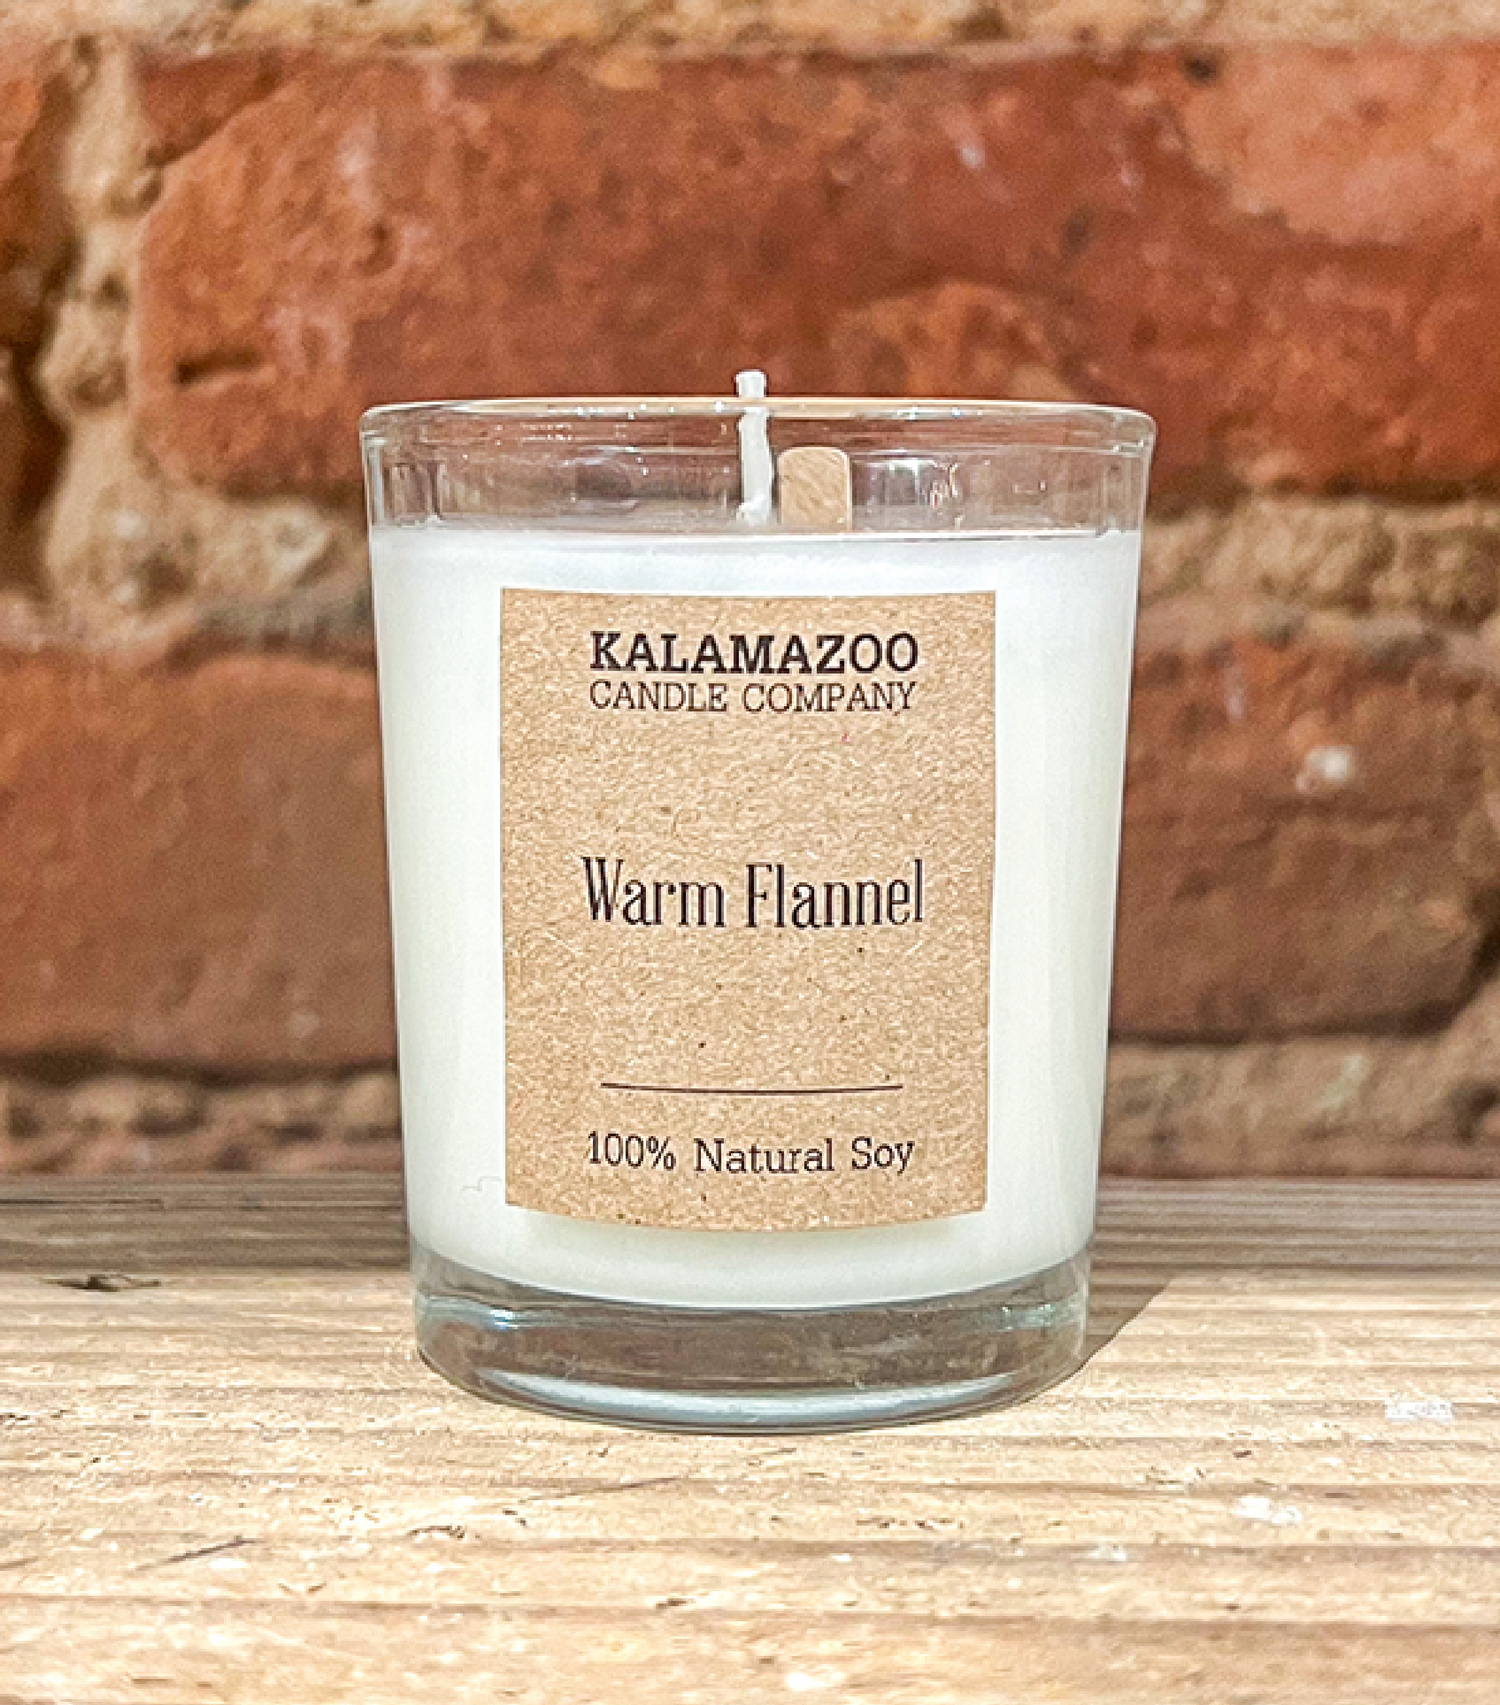 Like a big warm hug, this comfy blend of luxe cashmere, soft musk, and rich cedarwood brightened with sunny citrus, will wrap you in cozy feels. Made In the USA In Kalamazoo, MI.